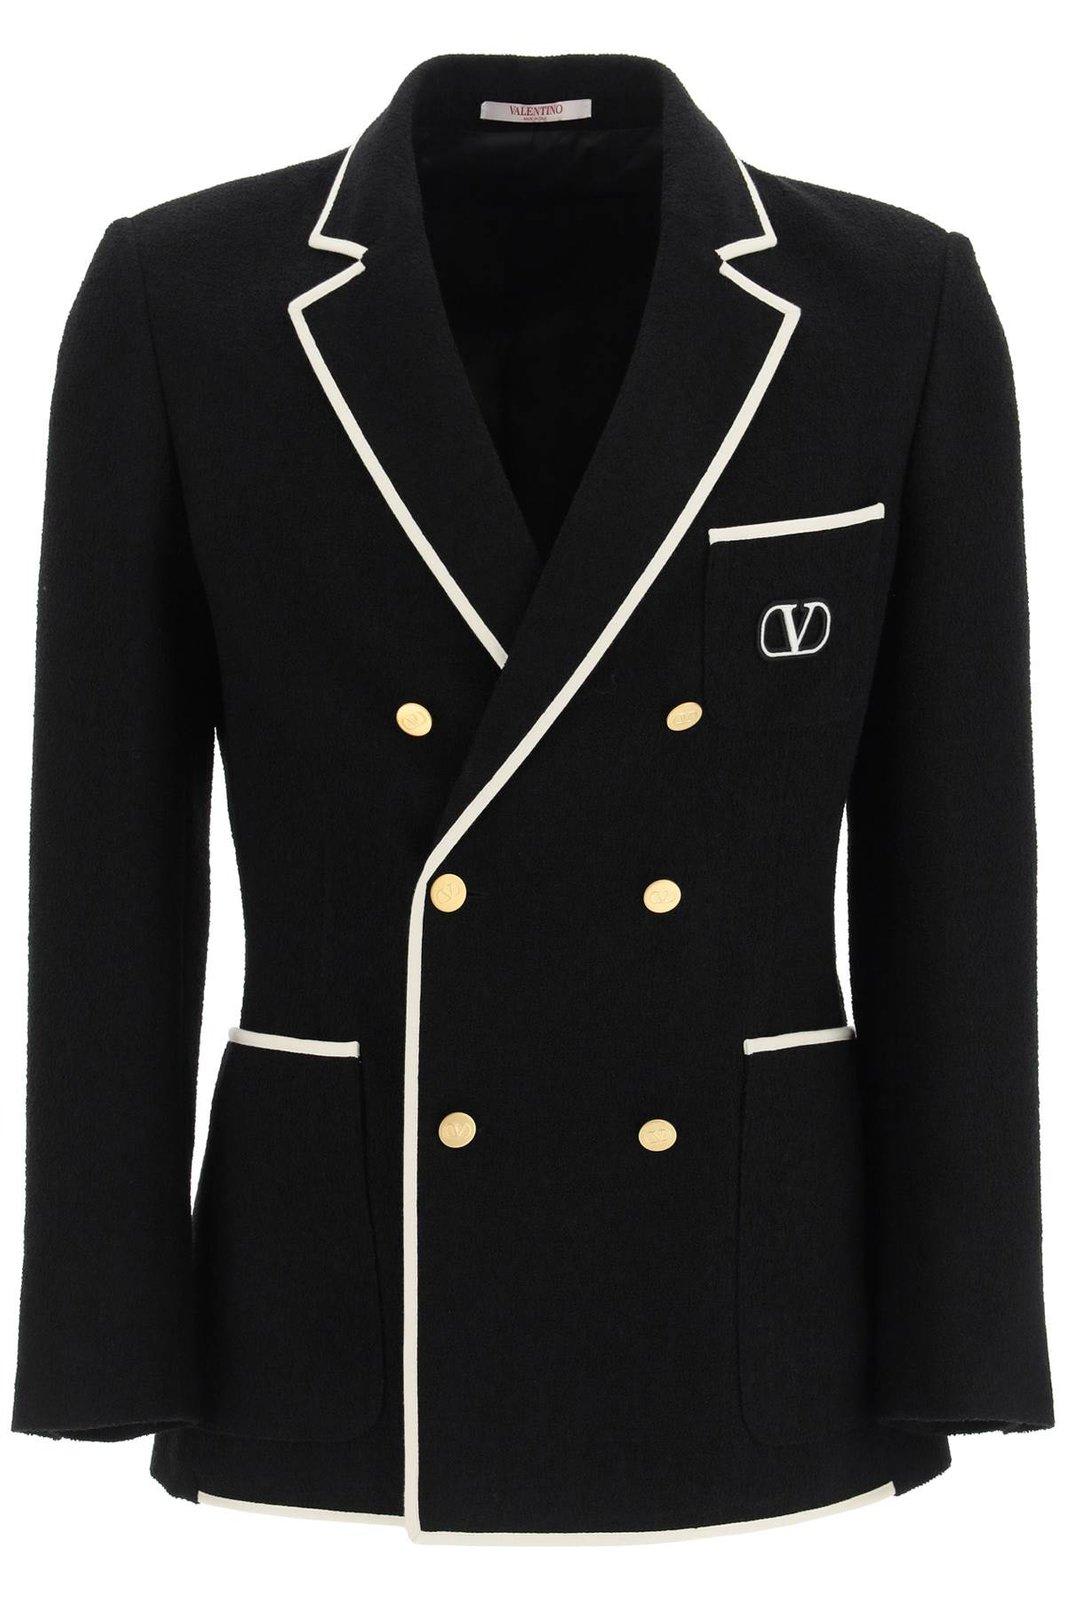 Valentino Double-breasted Long-sleeved Blazer